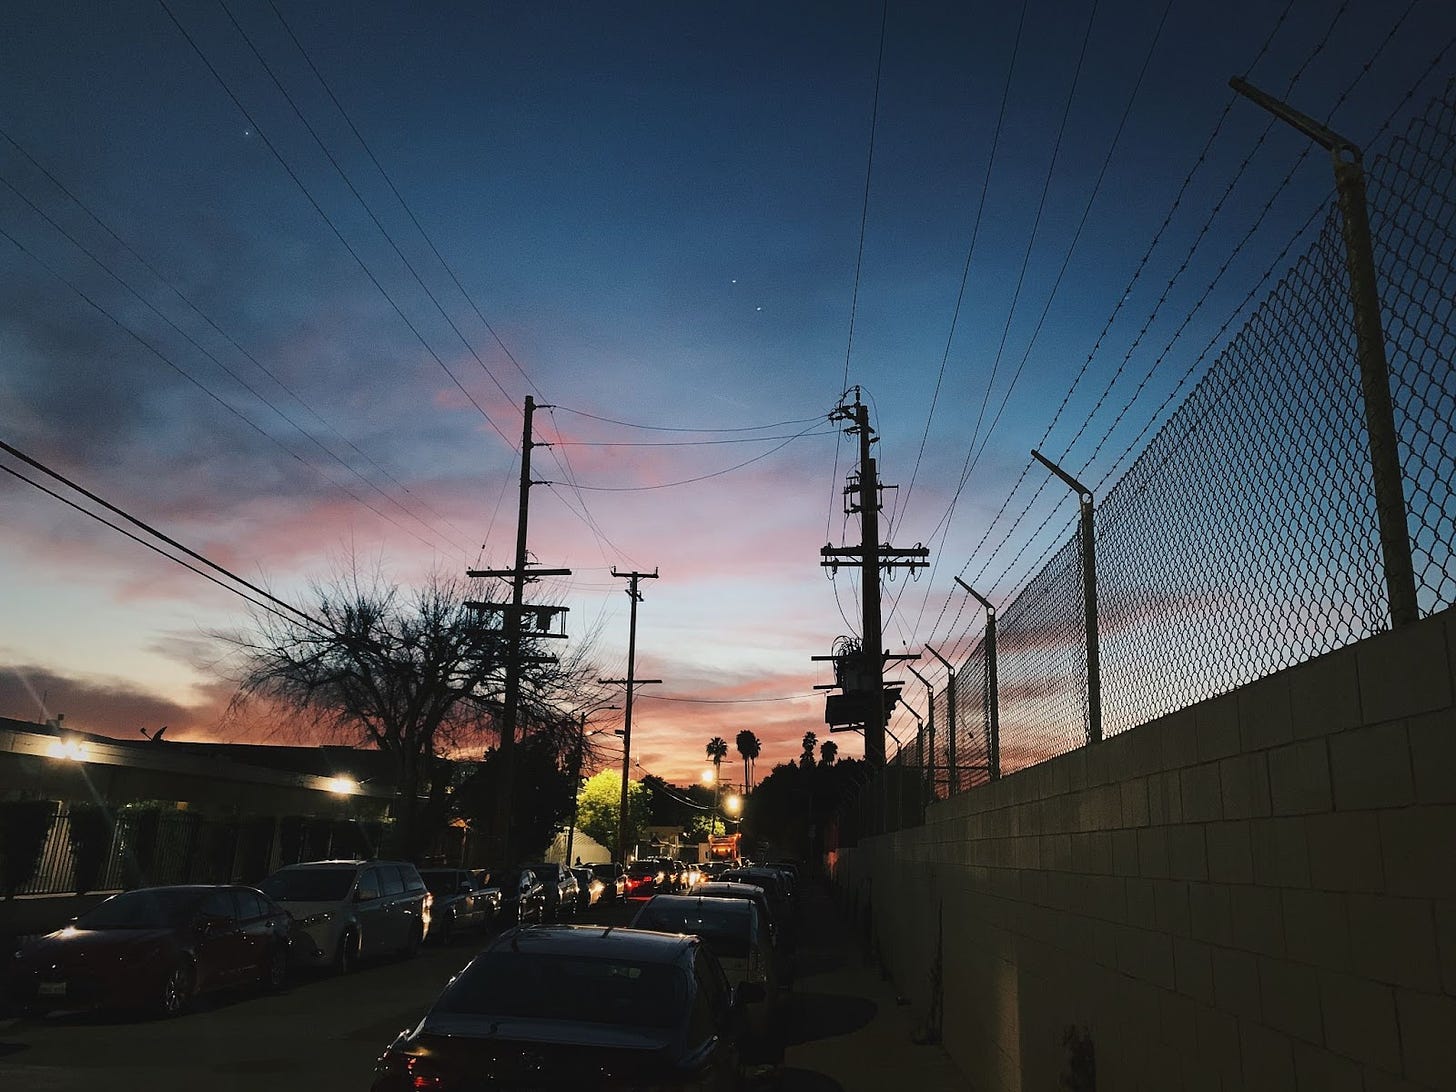 Photo of a city street at dusk with a blue pink orange sunset, power lines, a brick wall with barbed wire, cars parallel parked, street lights, and palm trees at the end of the street.